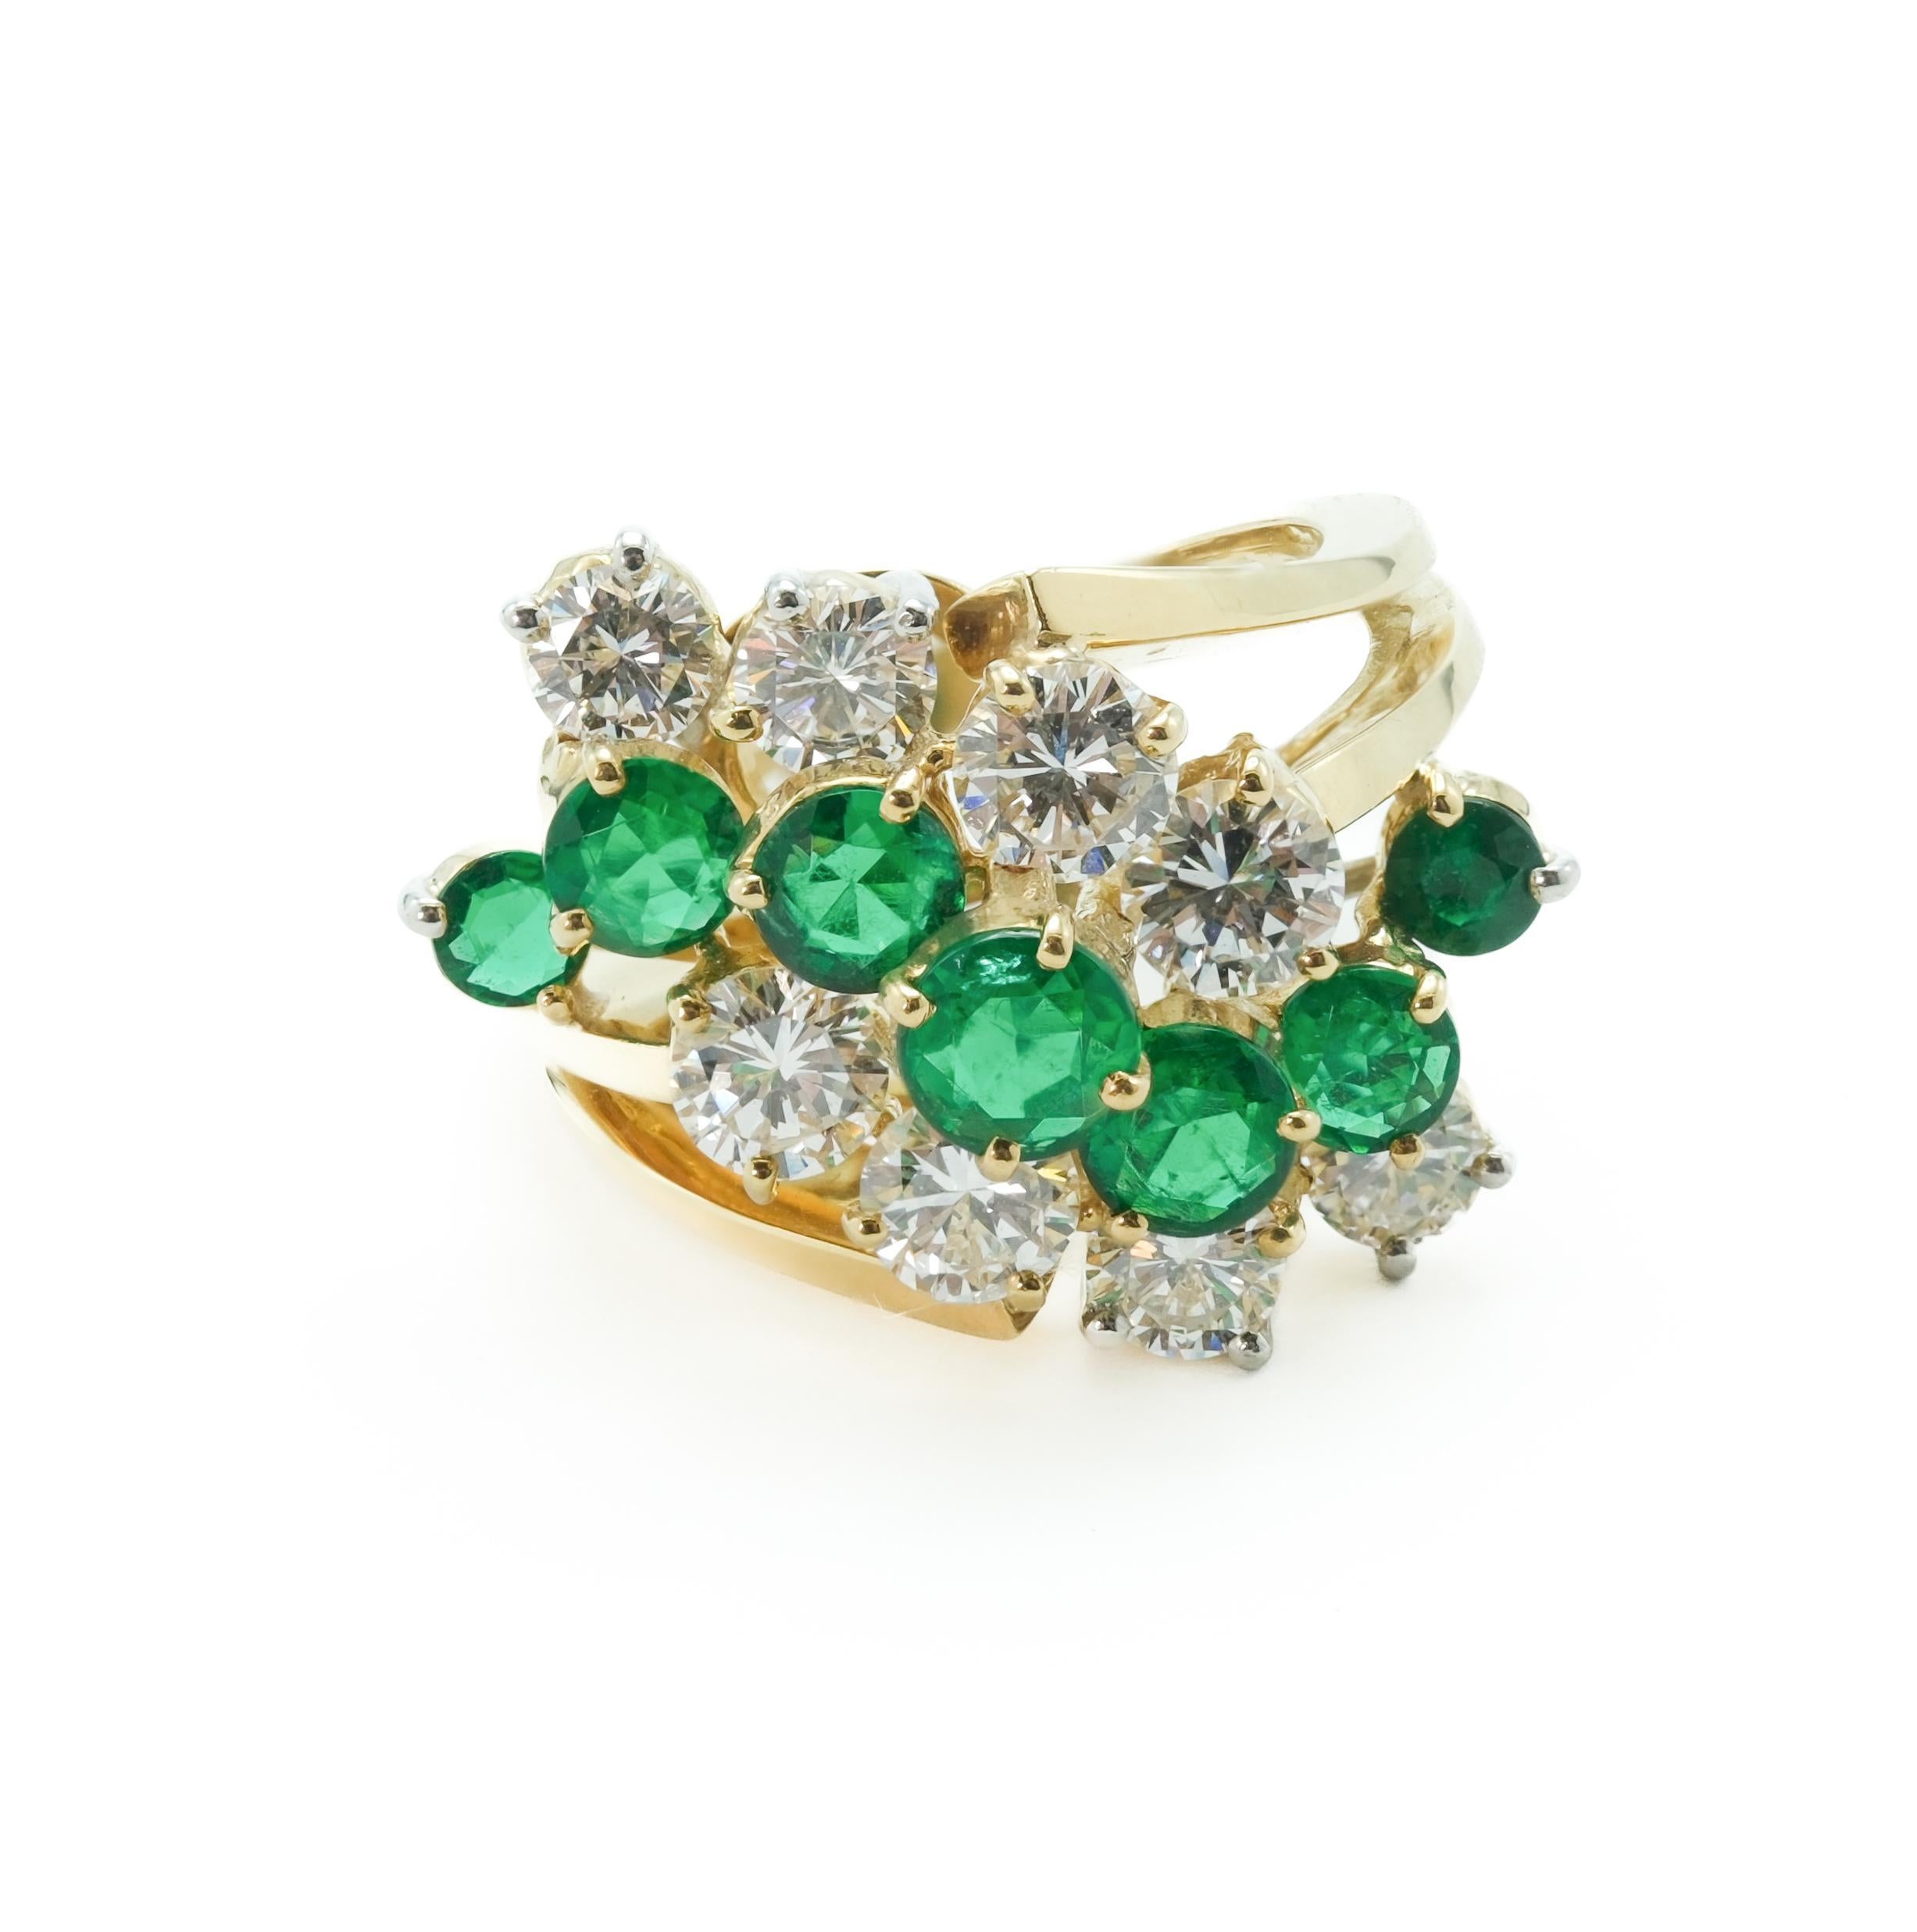 Modernist Kurt Wayne ring featuring 1.7 ctw emeralds and 1.9 ctw diamonds. This exquisite ring is designed in the style to make the emeralds the center of attention. The contrast of the clean white diamonds surrounding the forest green emeralds is